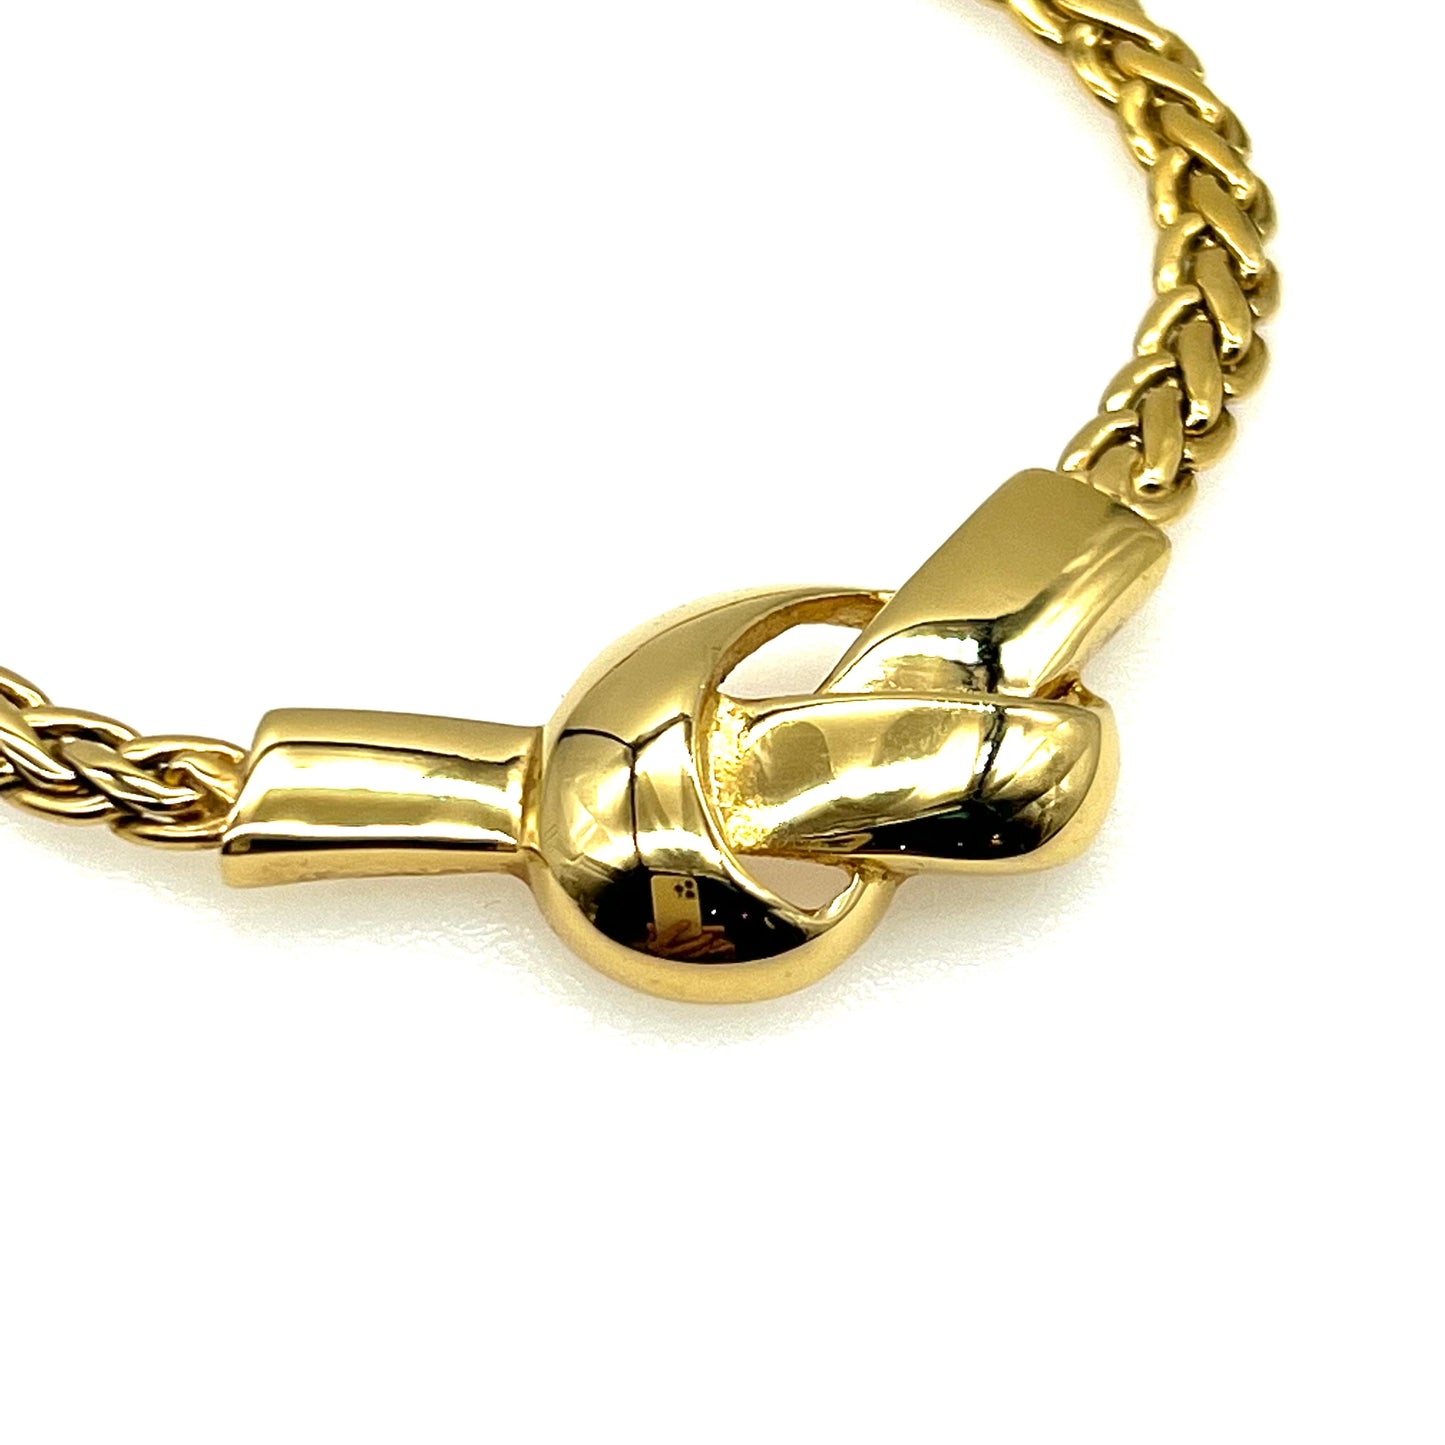 Signed Gold Plated Open Work Love Knot Integral Pendant Necklace